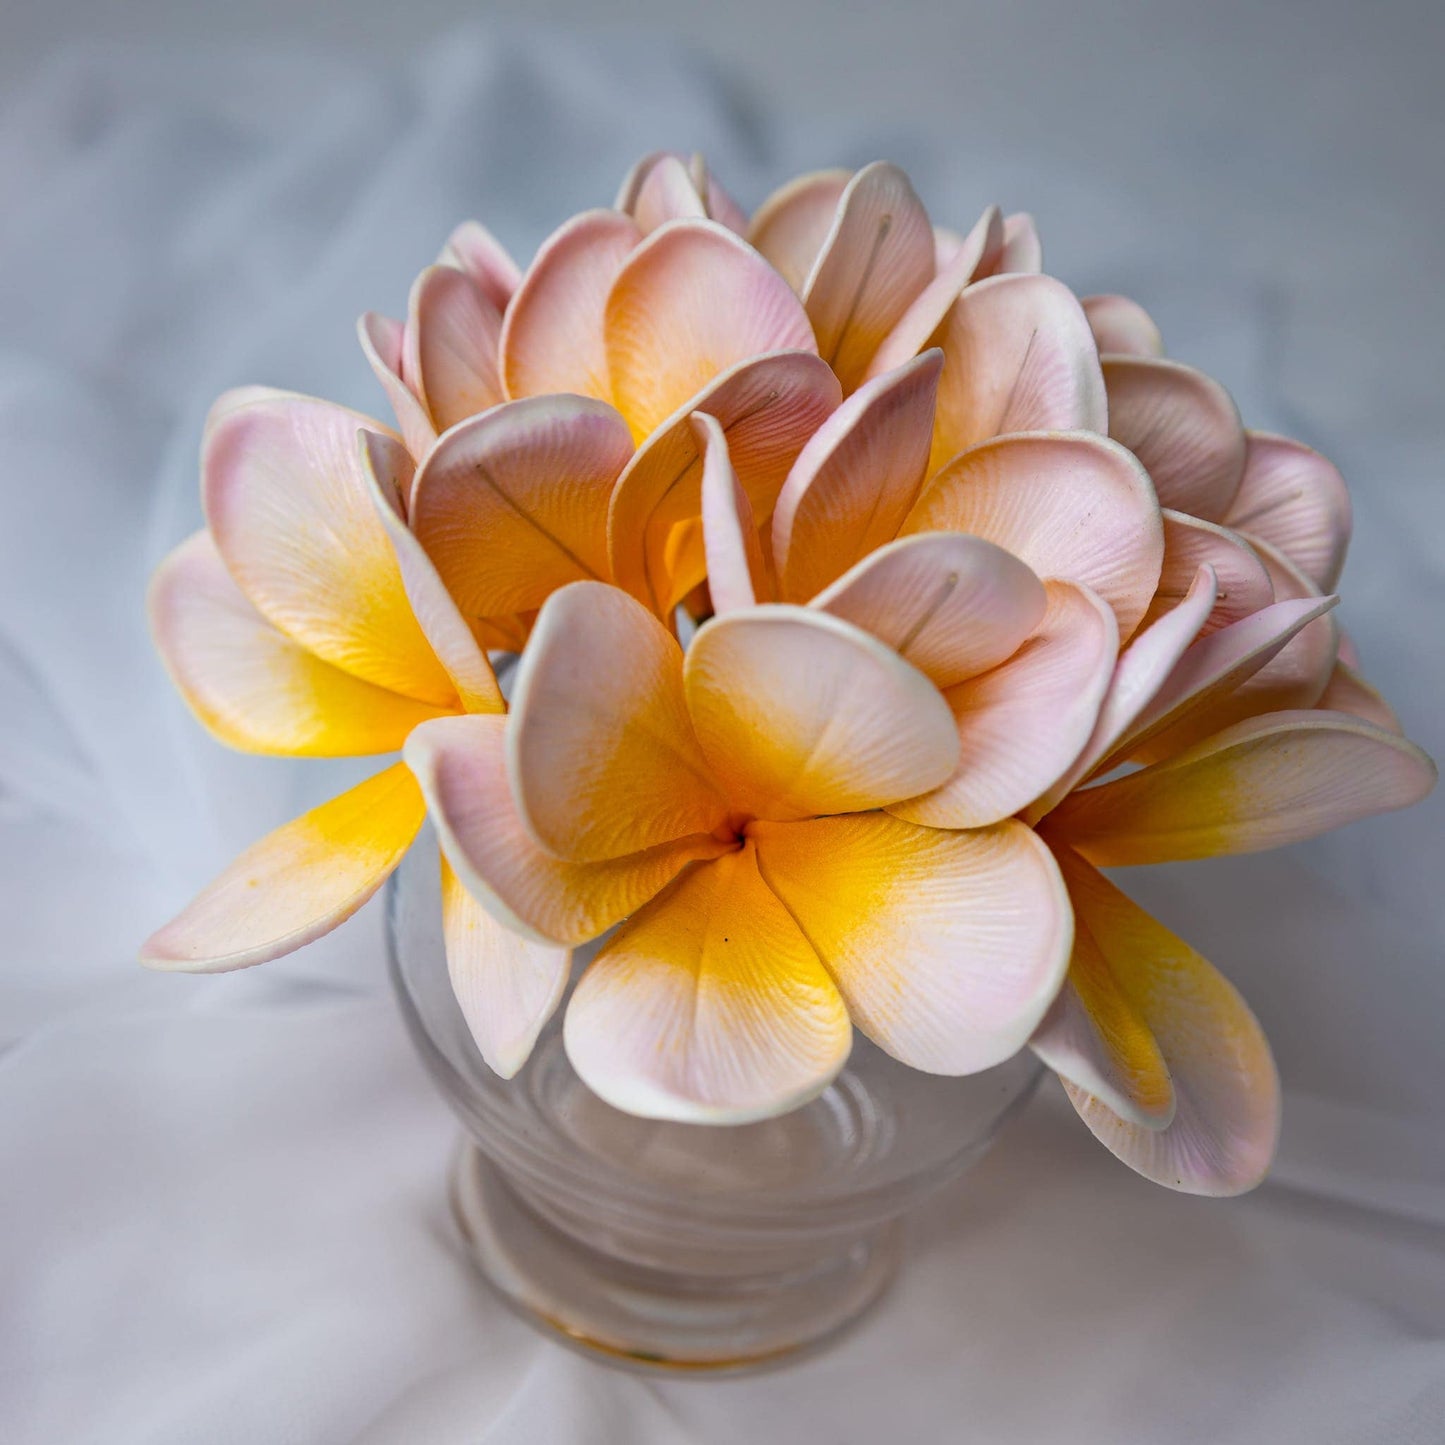 artificial pale frangipani flowers place in transparent glass vase